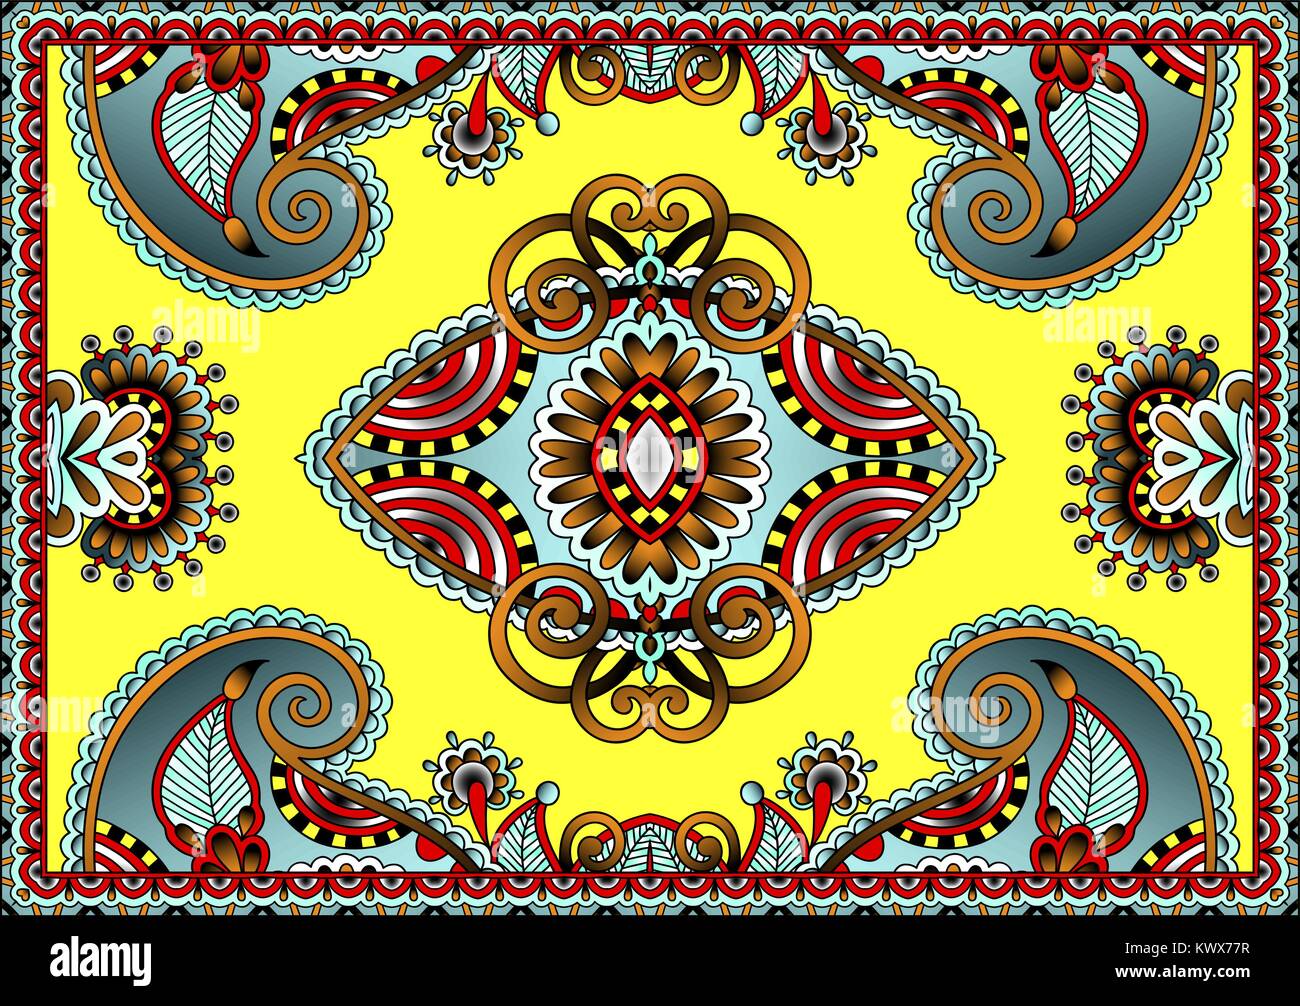 Old persian carpet Stock Vector Images - Alamy